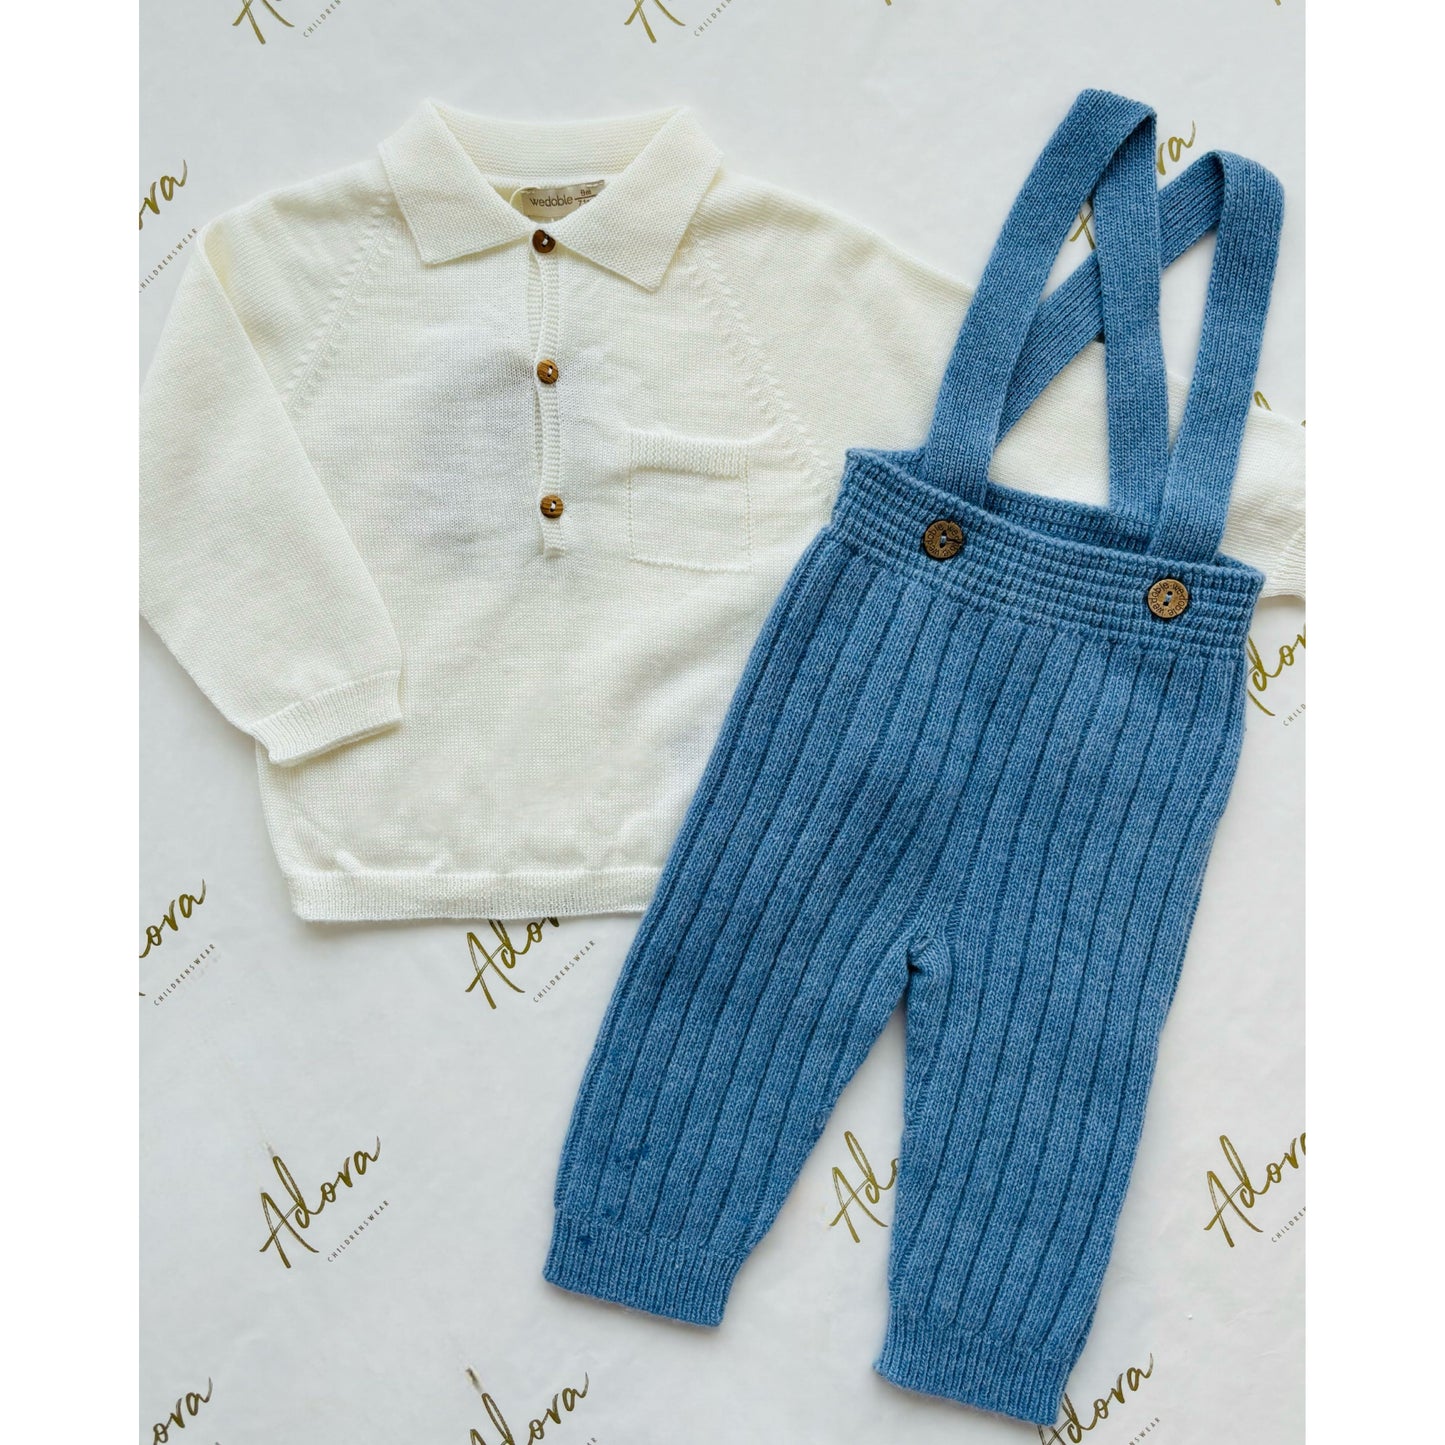 Boys cream merino wool polo top and blue dungarees